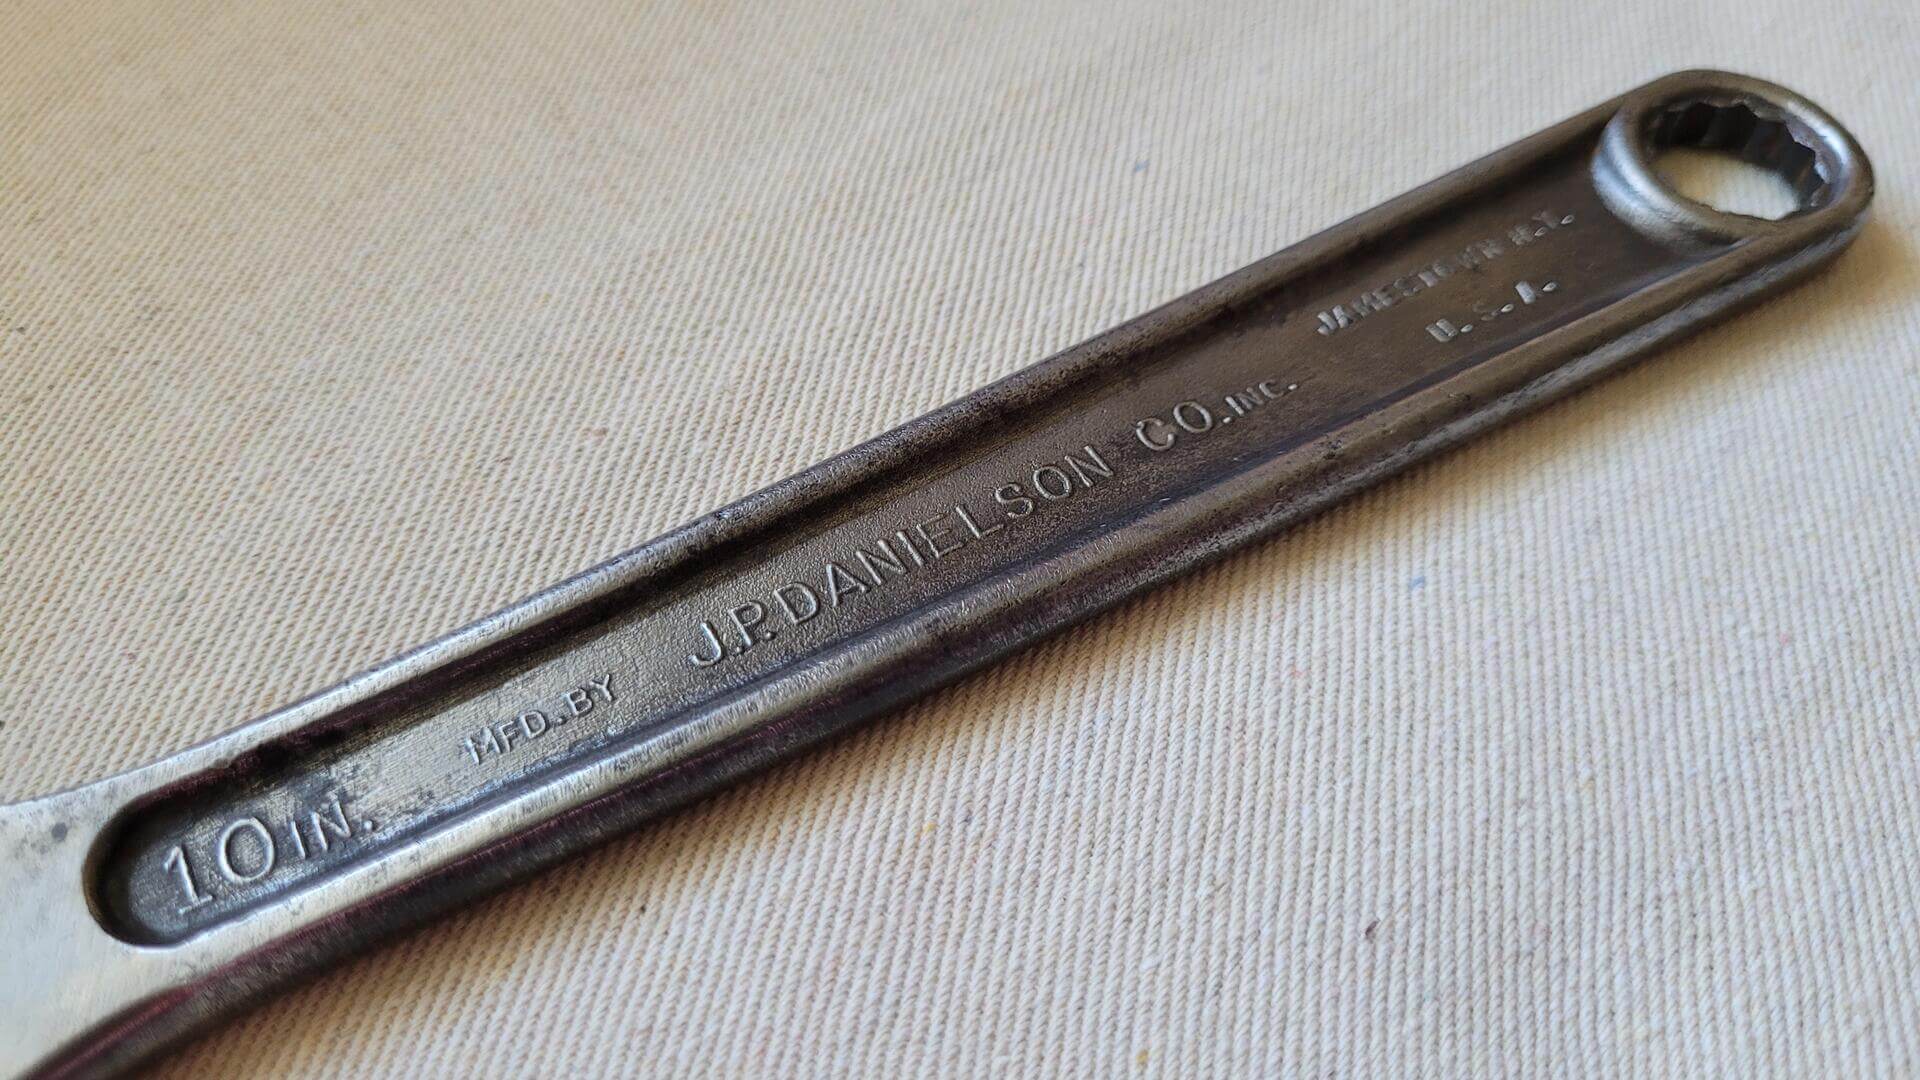 Vintage J.P. Danielson & Company 10 inch Betr-Grip forged steel adjustable wrench - Antique Jamestown NY made in USA collectible hand tools